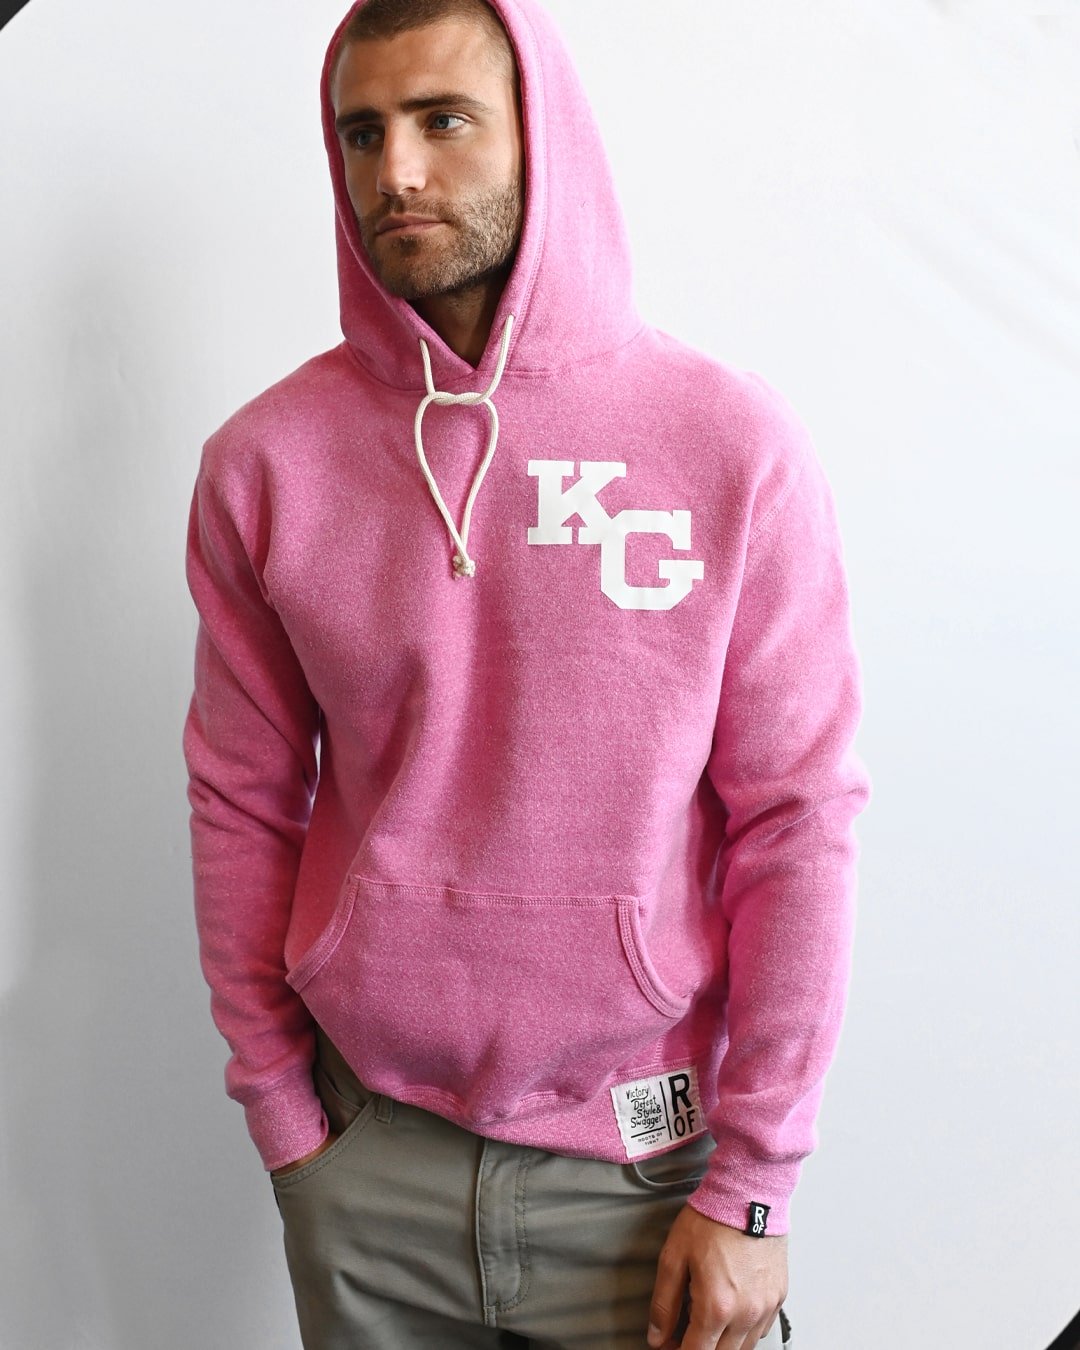 Kevin Garnett 'The Big Ticket' Pink PO Hoody - Roots of Fight Canada